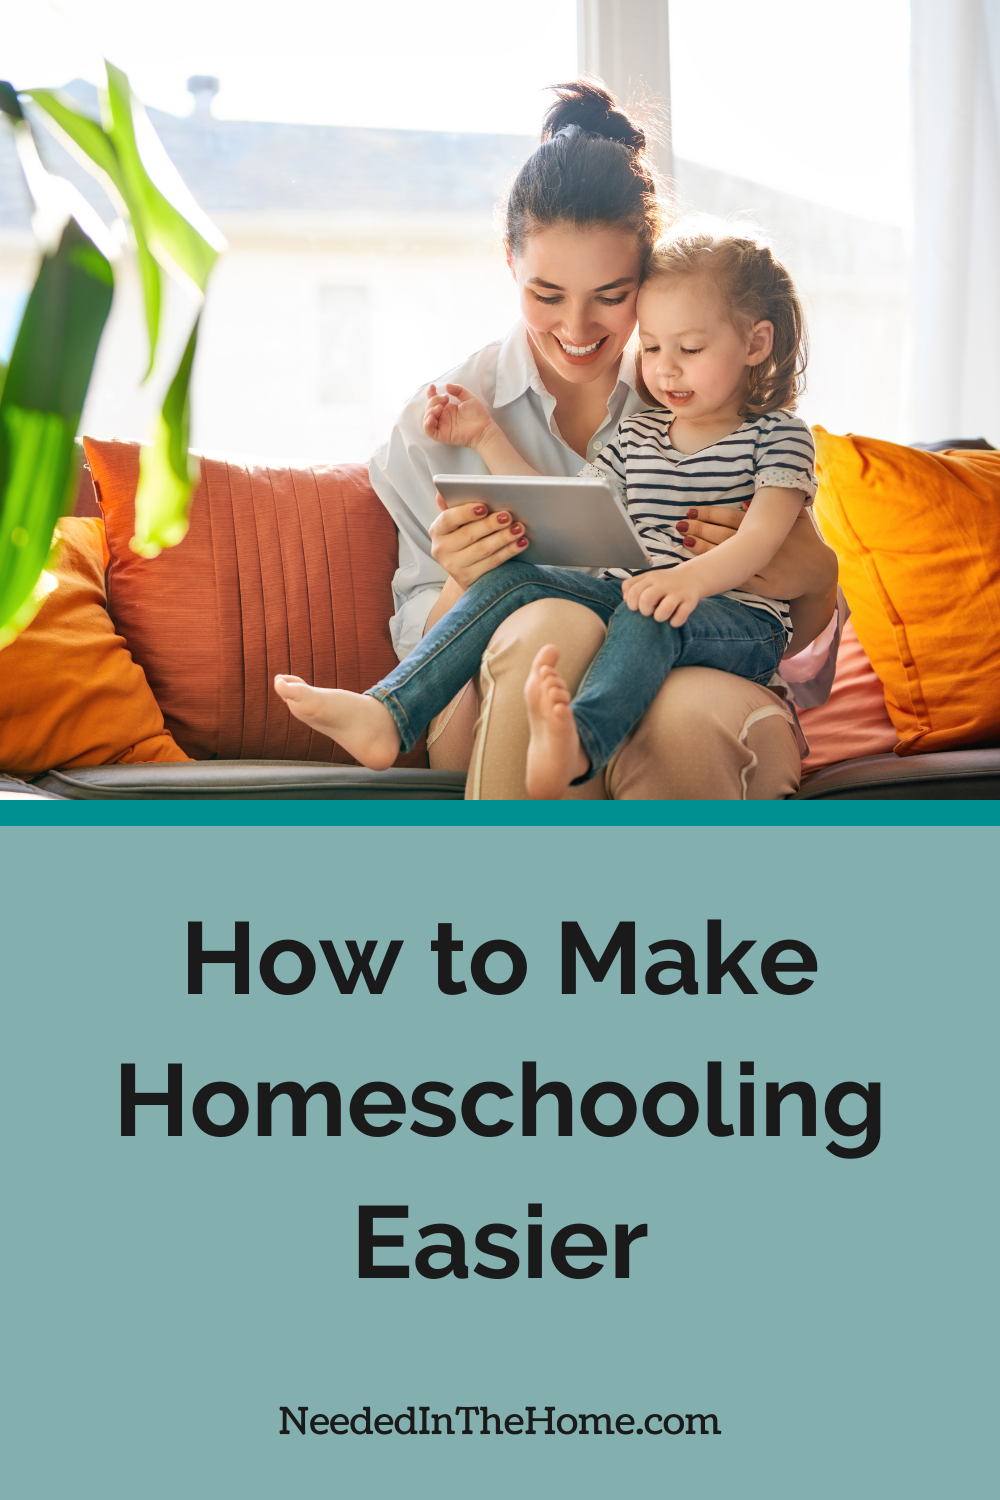 pinterest pin description how to make homeschooling easier mom and daughter on couch reading together neededinthehome